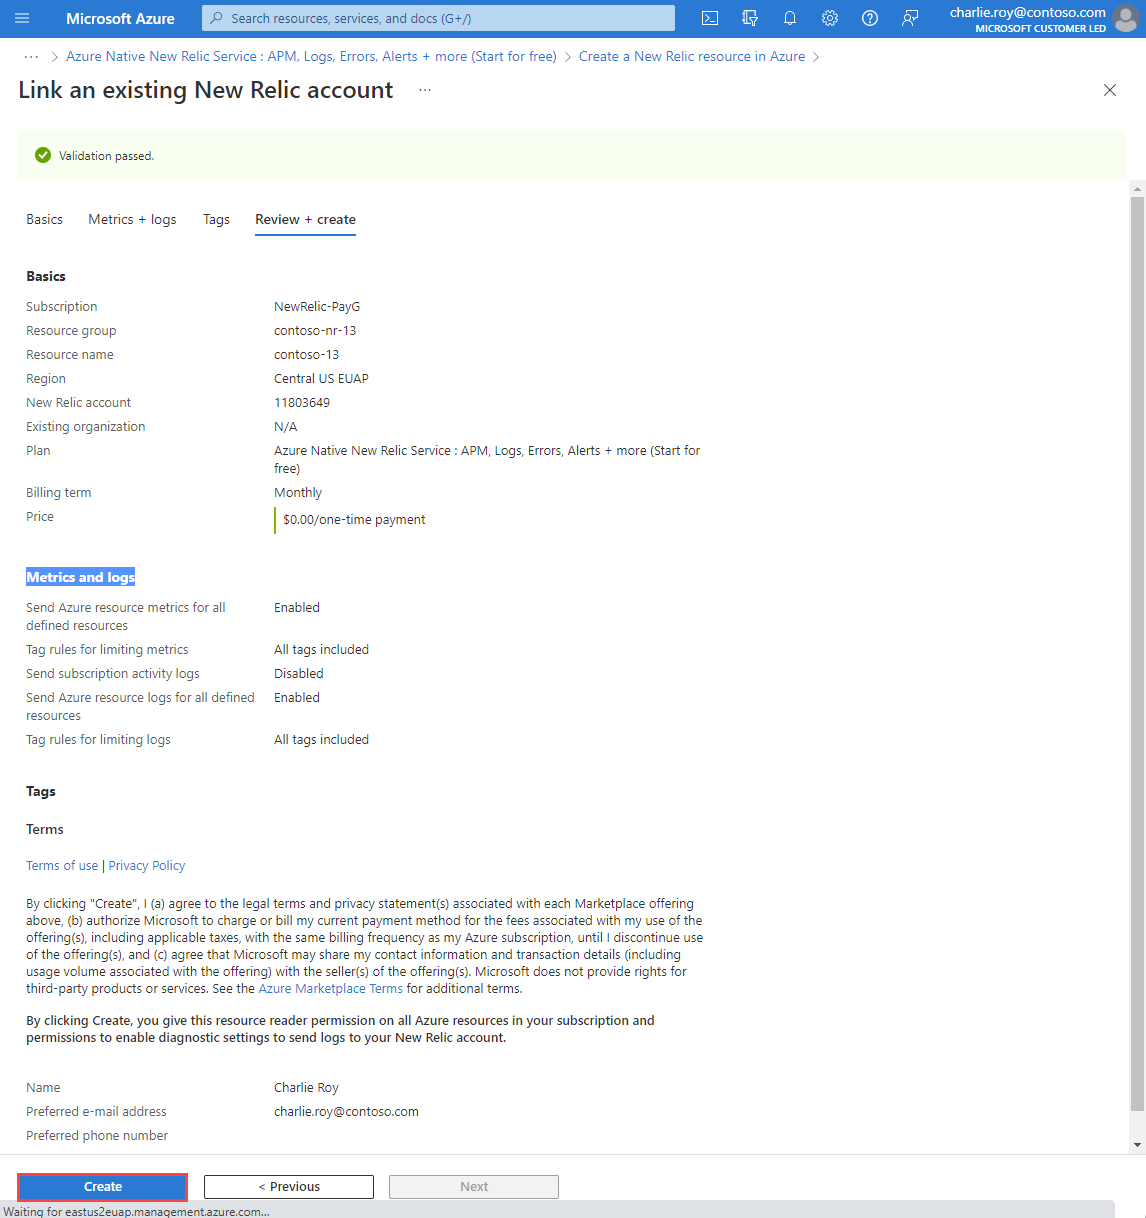 Screenshot that shows the tab for reviewing and creating a New Relic resource, with a summary of completed information.